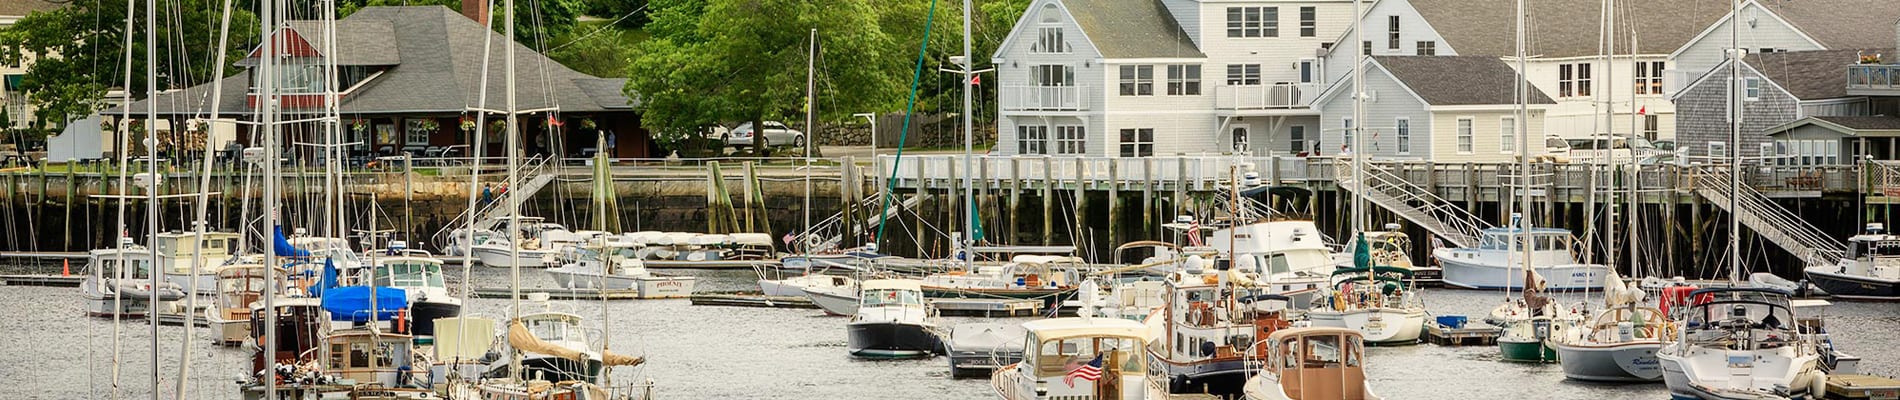 Camden Harbor in the summer with boats